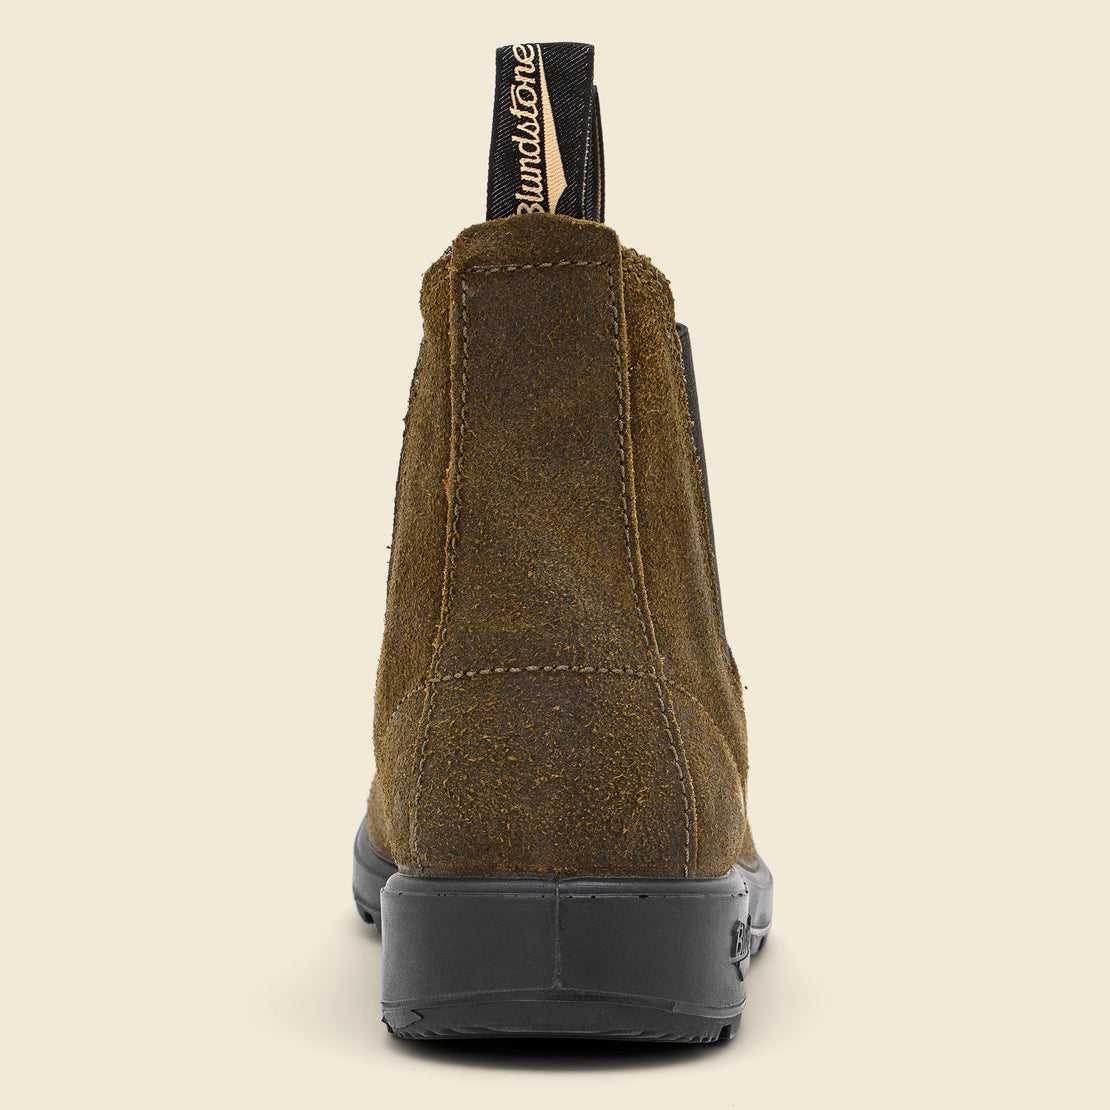 1615 Original Series Suede Chelsea Boot - Dark Olive - Blundstone - STAG Provisions - Shoes - Boots / Chukkas